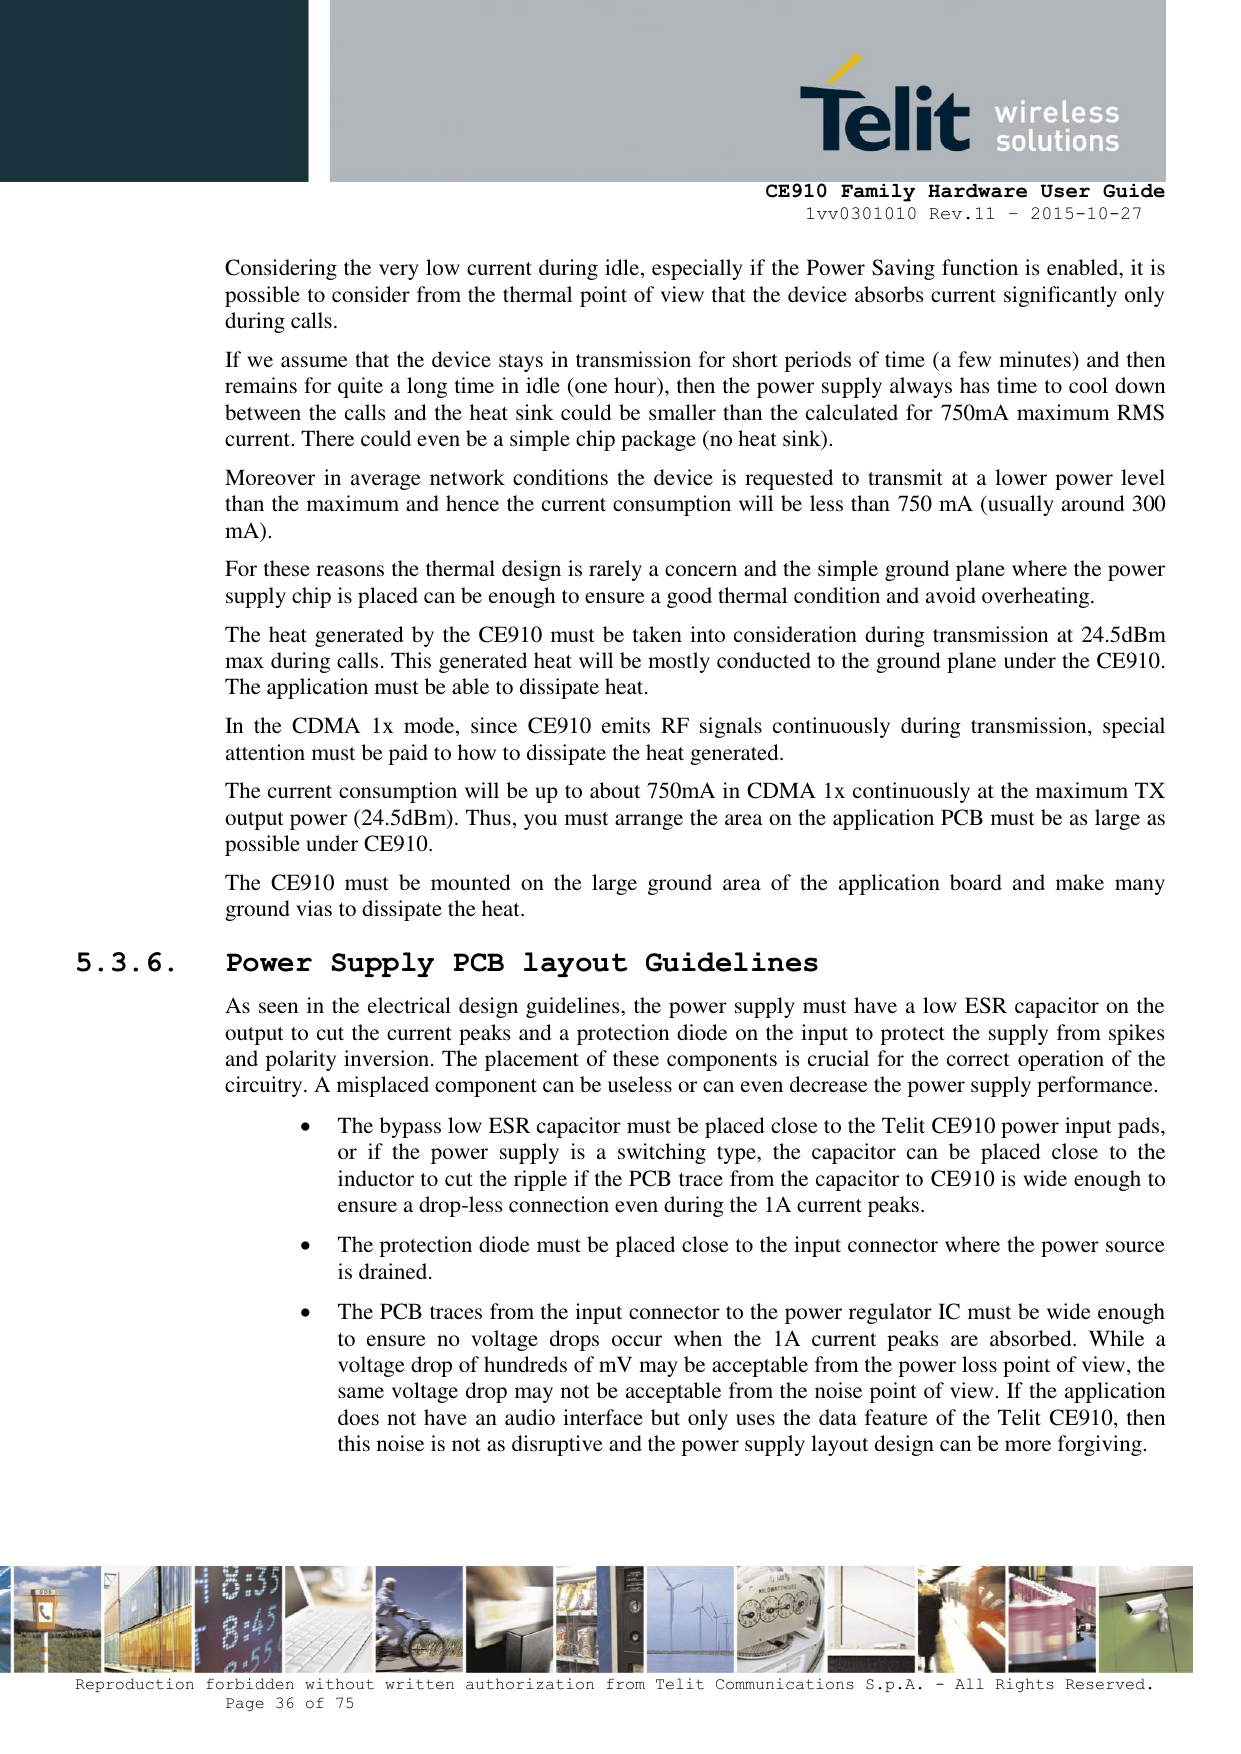     CE910 Family Hardware User Guide 1vv0301010 Rev.11 – 2015-10-27 Reproduction forbidden without written authorization from Telit Communications S.p.A. - All Rights Reserved.    Page 36 of 75                                                     Considering the very low current during idle, especially if the Power Saving function is enabled, it is possible to consider from the thermal point of view that the device absorbs current significantly only during calls.  If we assume that the device stays in transmission for short periods of time (a few minutes) and then remains for quite a long time in idle (one hour), then the power supply always has time to cool down between the calls and the heat sink could be smaller than the calculated for 750mA maximum RMS current. There could even be a simple chip package (no heat sink). Moreover in average network conditions the device is requested to transmit at a lower power level than the maximum and hence the current consumption will be less than 750 mA (usually around 300 mA). For these reasons the thermal design is rarely a concern and the simple ground plane where the power supply chip is placed can be enough to ensure a good thermal condition and avoid overheating. The heat generated by the CE910 must be taken into consideration during transmission at 24.5dBm max during calls. This generated heat will be mostly conducted to the ground plane under the CE910.  The application must be able to dissipate heat. In  the  CDMA  1x  mode,  since  CE910  emits  RF  signals  continuously  during  transmission,  special attention must be paid to how to dissipate the heat generated. The current consumption will be up to about 750mA in CDMA 1x continuously at the maximum TX output power (24.5dBm). Thus, you must arrange the area on the application PCB must be as large as possible under CE910. The  CE910  must  be  mounted  on  the  large  ground  area  of  the  application  board  and  make  many ground vias to dissipate the heat. 5.3.6. Power Supply PCB layout Guidelines As seen in the electrical design guidelines, the power supply must have a low ESR capacitor on the output to cut the current peaks and a protection diode on the input to protect the supply from spikes and polarity inversion. The placement of these components is crucial for the correct operation of the circuitry. A misplaced component can be useless or can even decrease the power supply performance.  The bypass low ESR capacitor must be placed close to the Telit CE910 power input pads, or  if  the  power  supply  is  a  switching  type,  the  capacitor  can  be  placed  close  to  the inductor to cut the ripple if the PCB trace from the capacitor to CE910 is wide enough to ensure a drop-less connection even during the 1A current peaks.  The protection diode must be placed close to the input connector where the power source is drained.  The PCB traces from the input connector to the power regulator IC must be wide enough to  ensure  no  voltage  drops  occur  when  the  1A  current  peaks  are  absorbed.  While  a voltage drop of hundreds of mV may be acceptable from the power loss point of view, the same voltage drop may not be acceptable from the noise point of view. If the application does not have an audio interface but only uses the data feature of the Telit CE910, then this noise is not as disruptive and the power supply layout design can be more forgiving. 